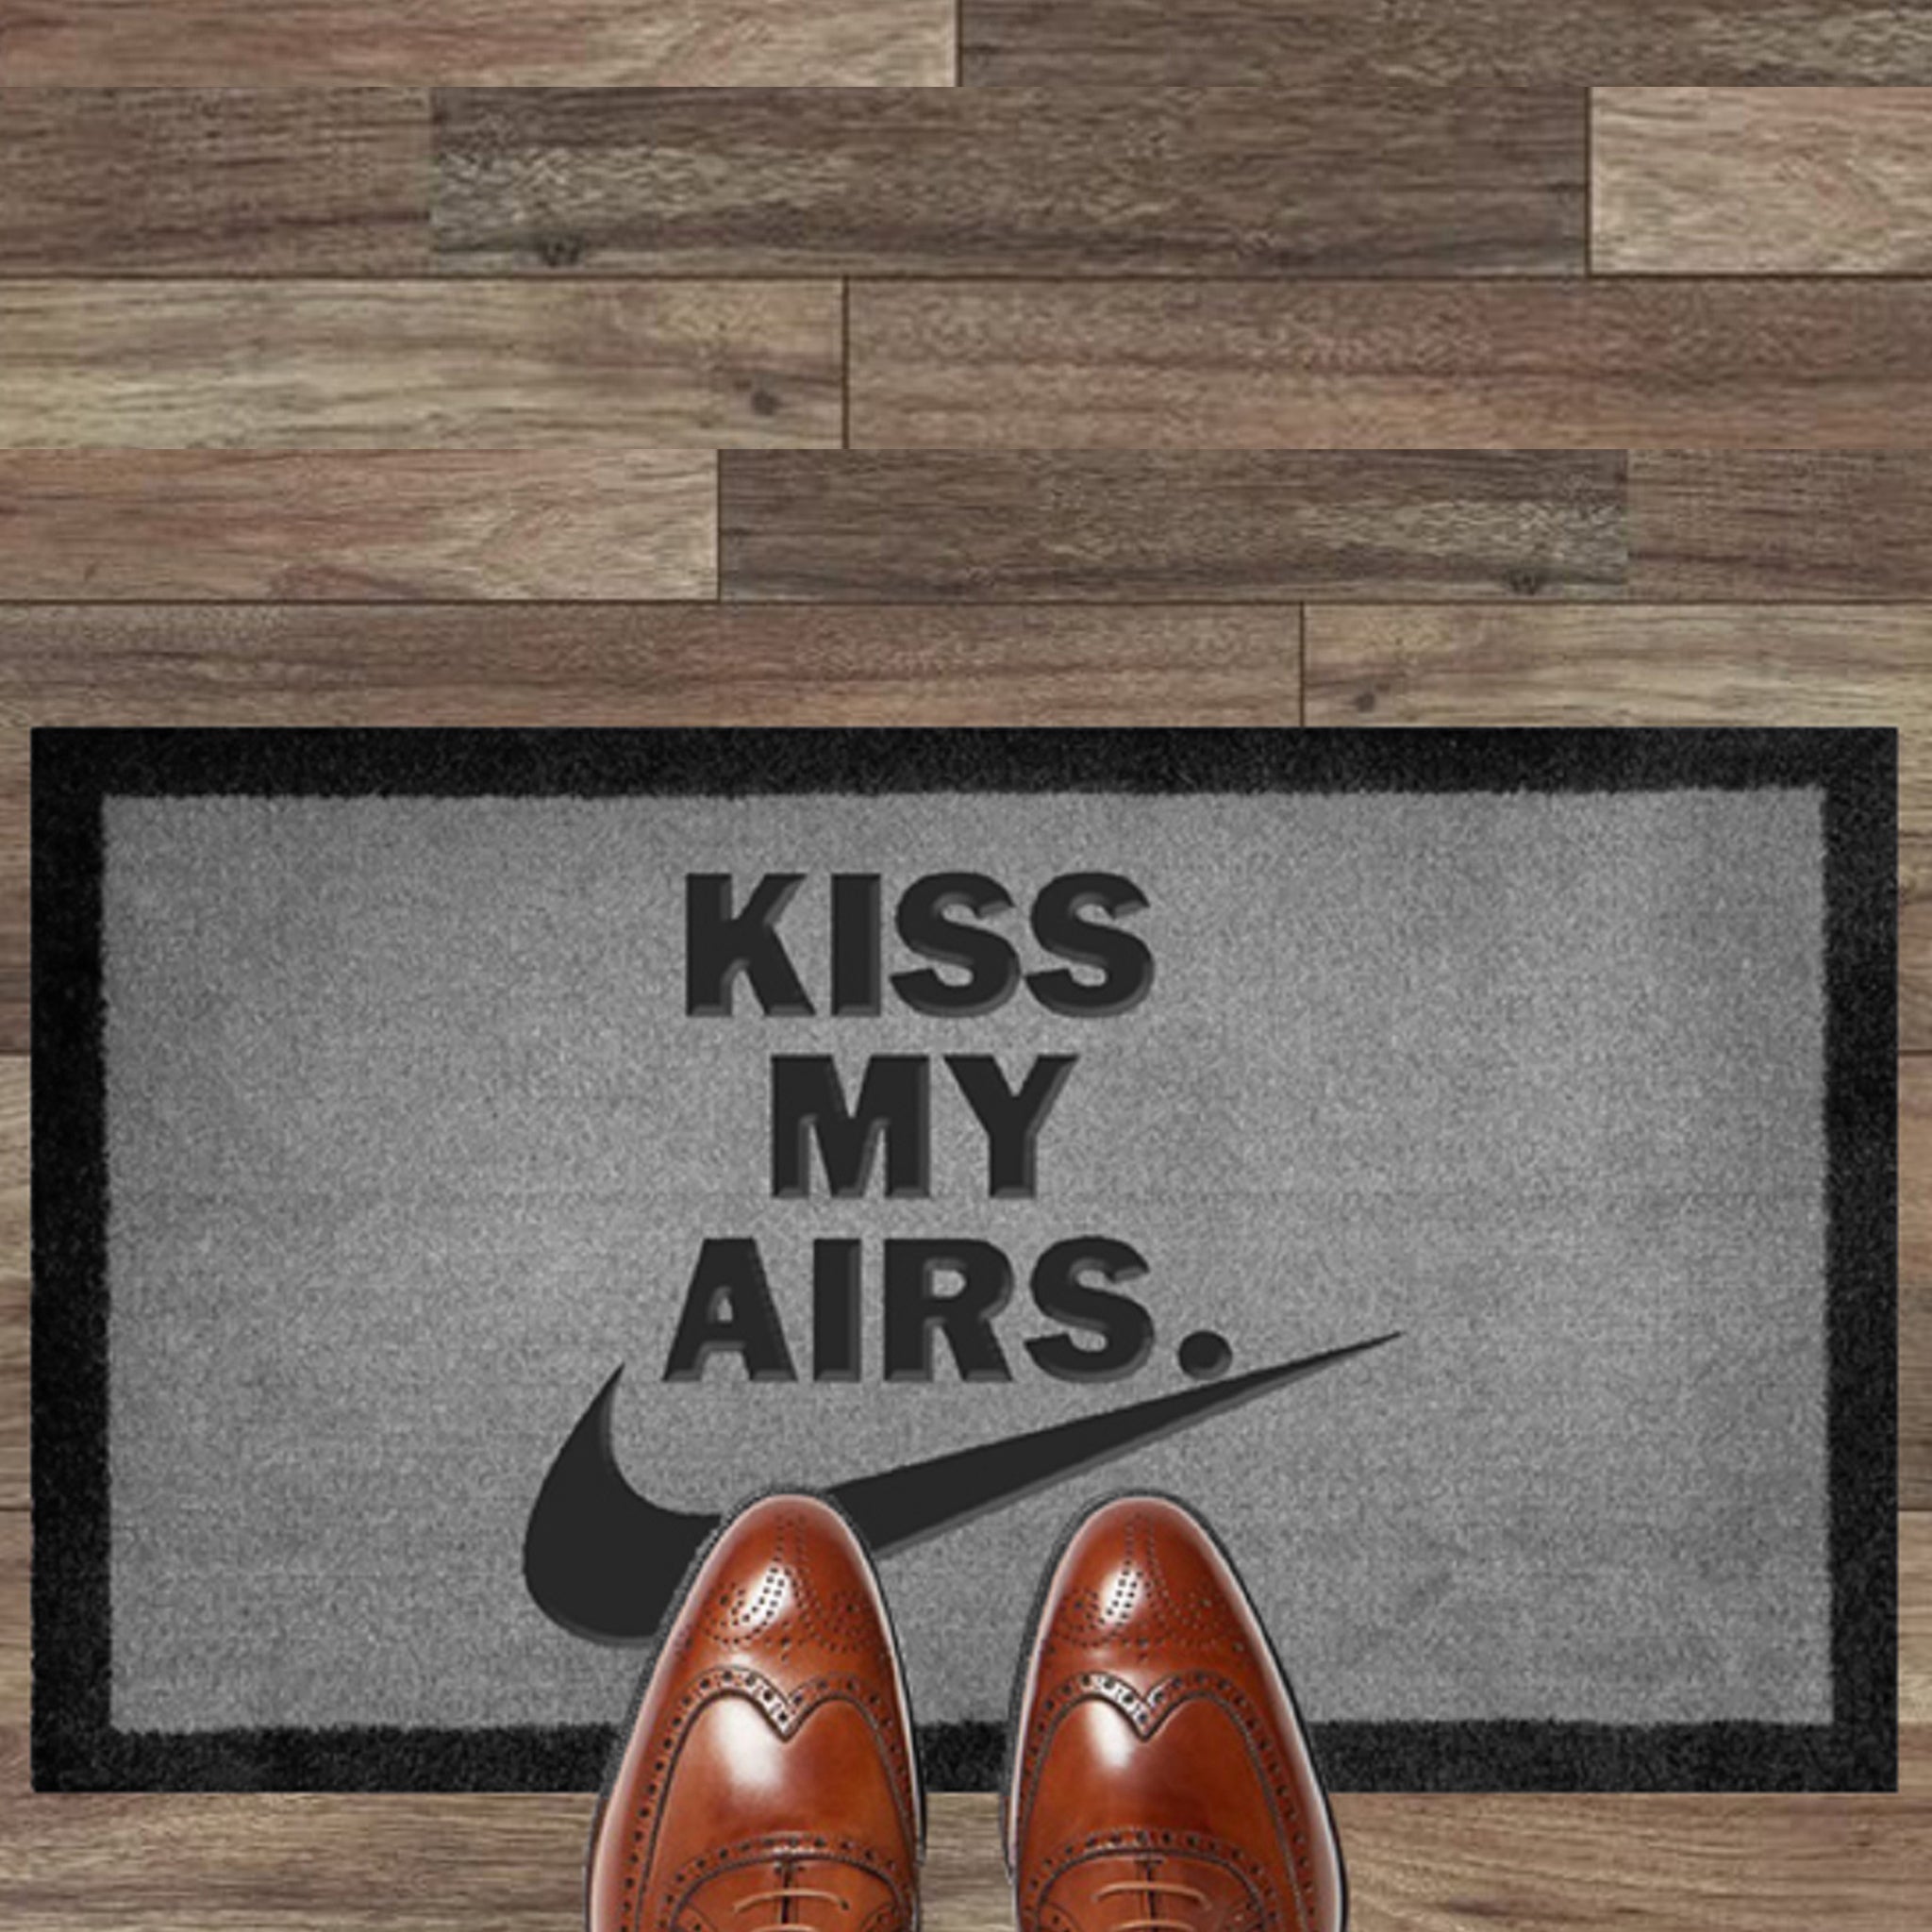 Shoes view of Kiss My Airs Light Grey Doormat 70x40cm